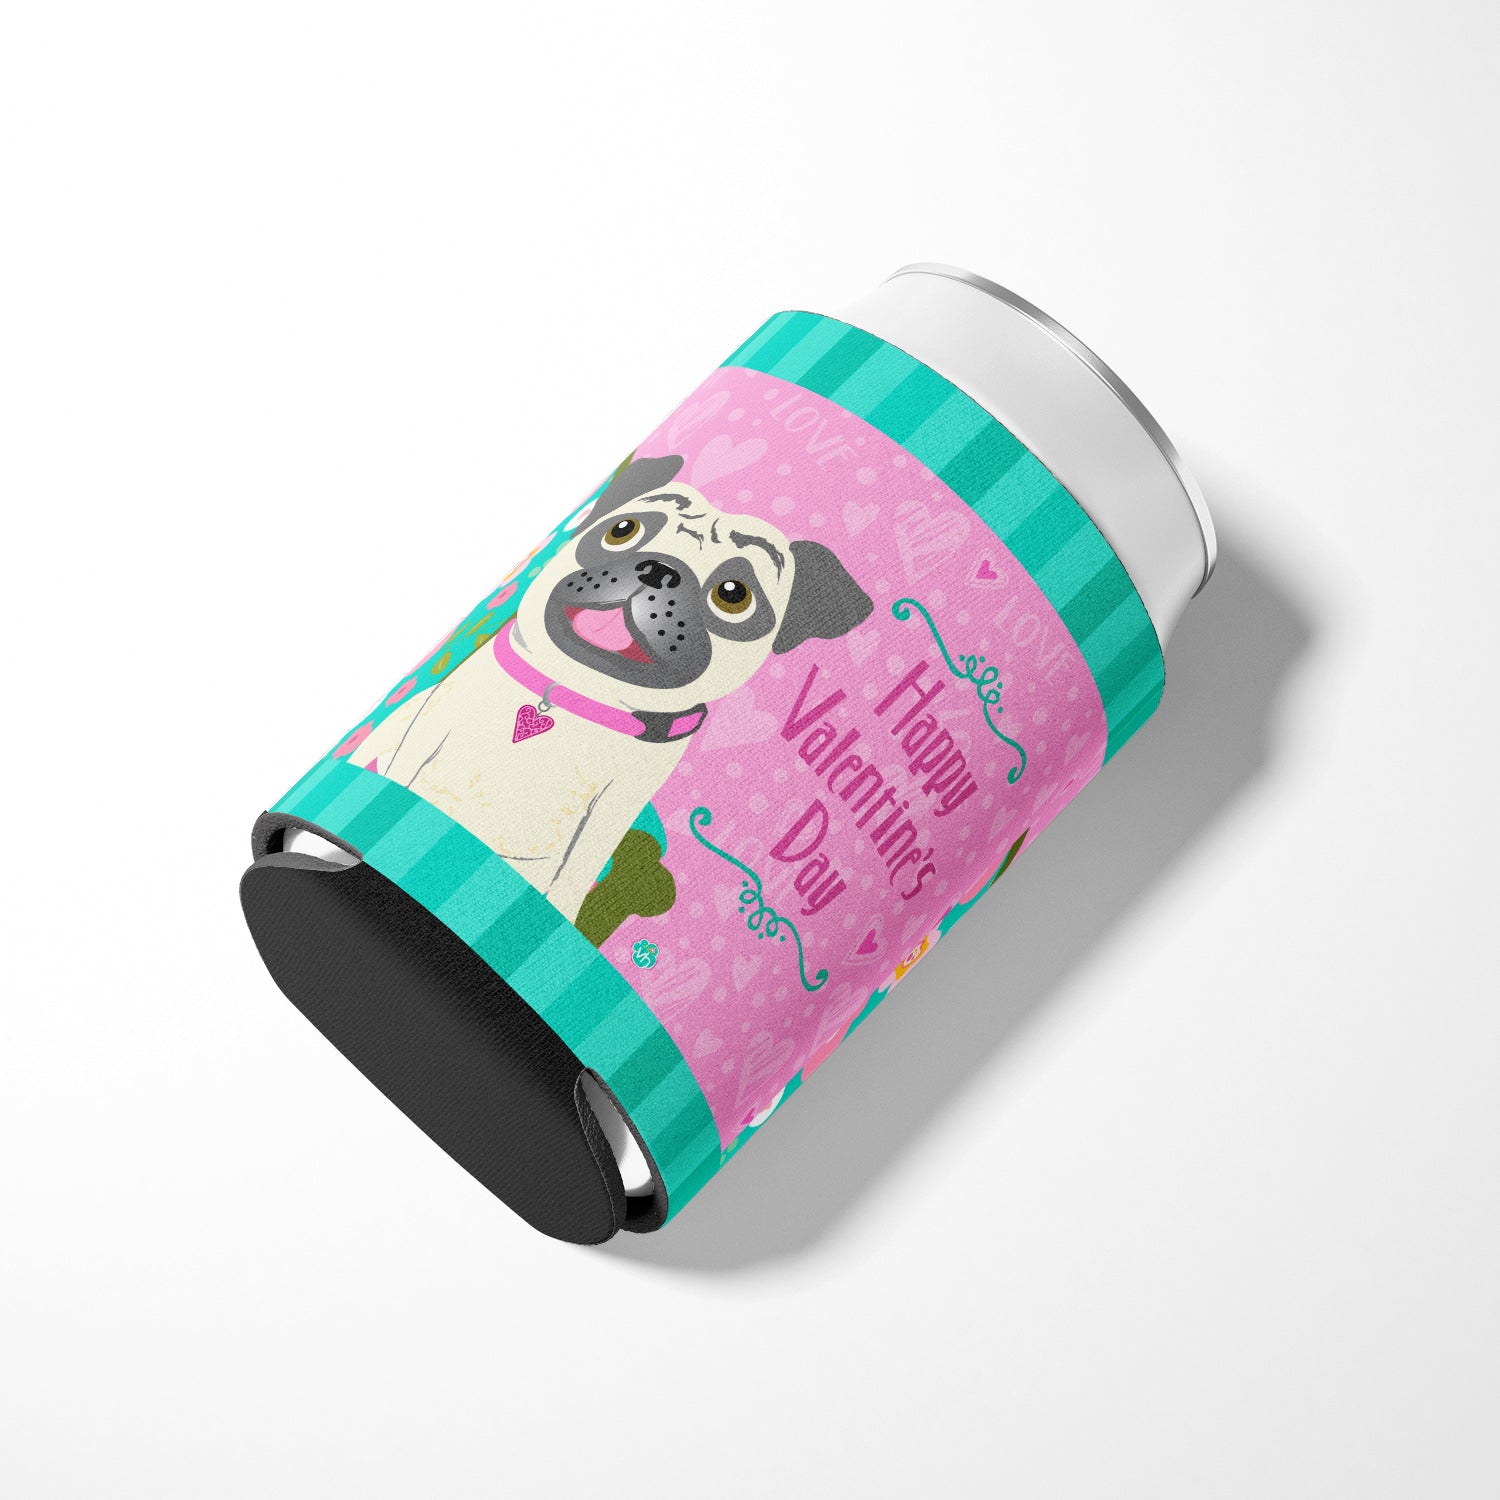 Happy Valentine's Day Pug Can or Bottle Hugger VHA3002CC.